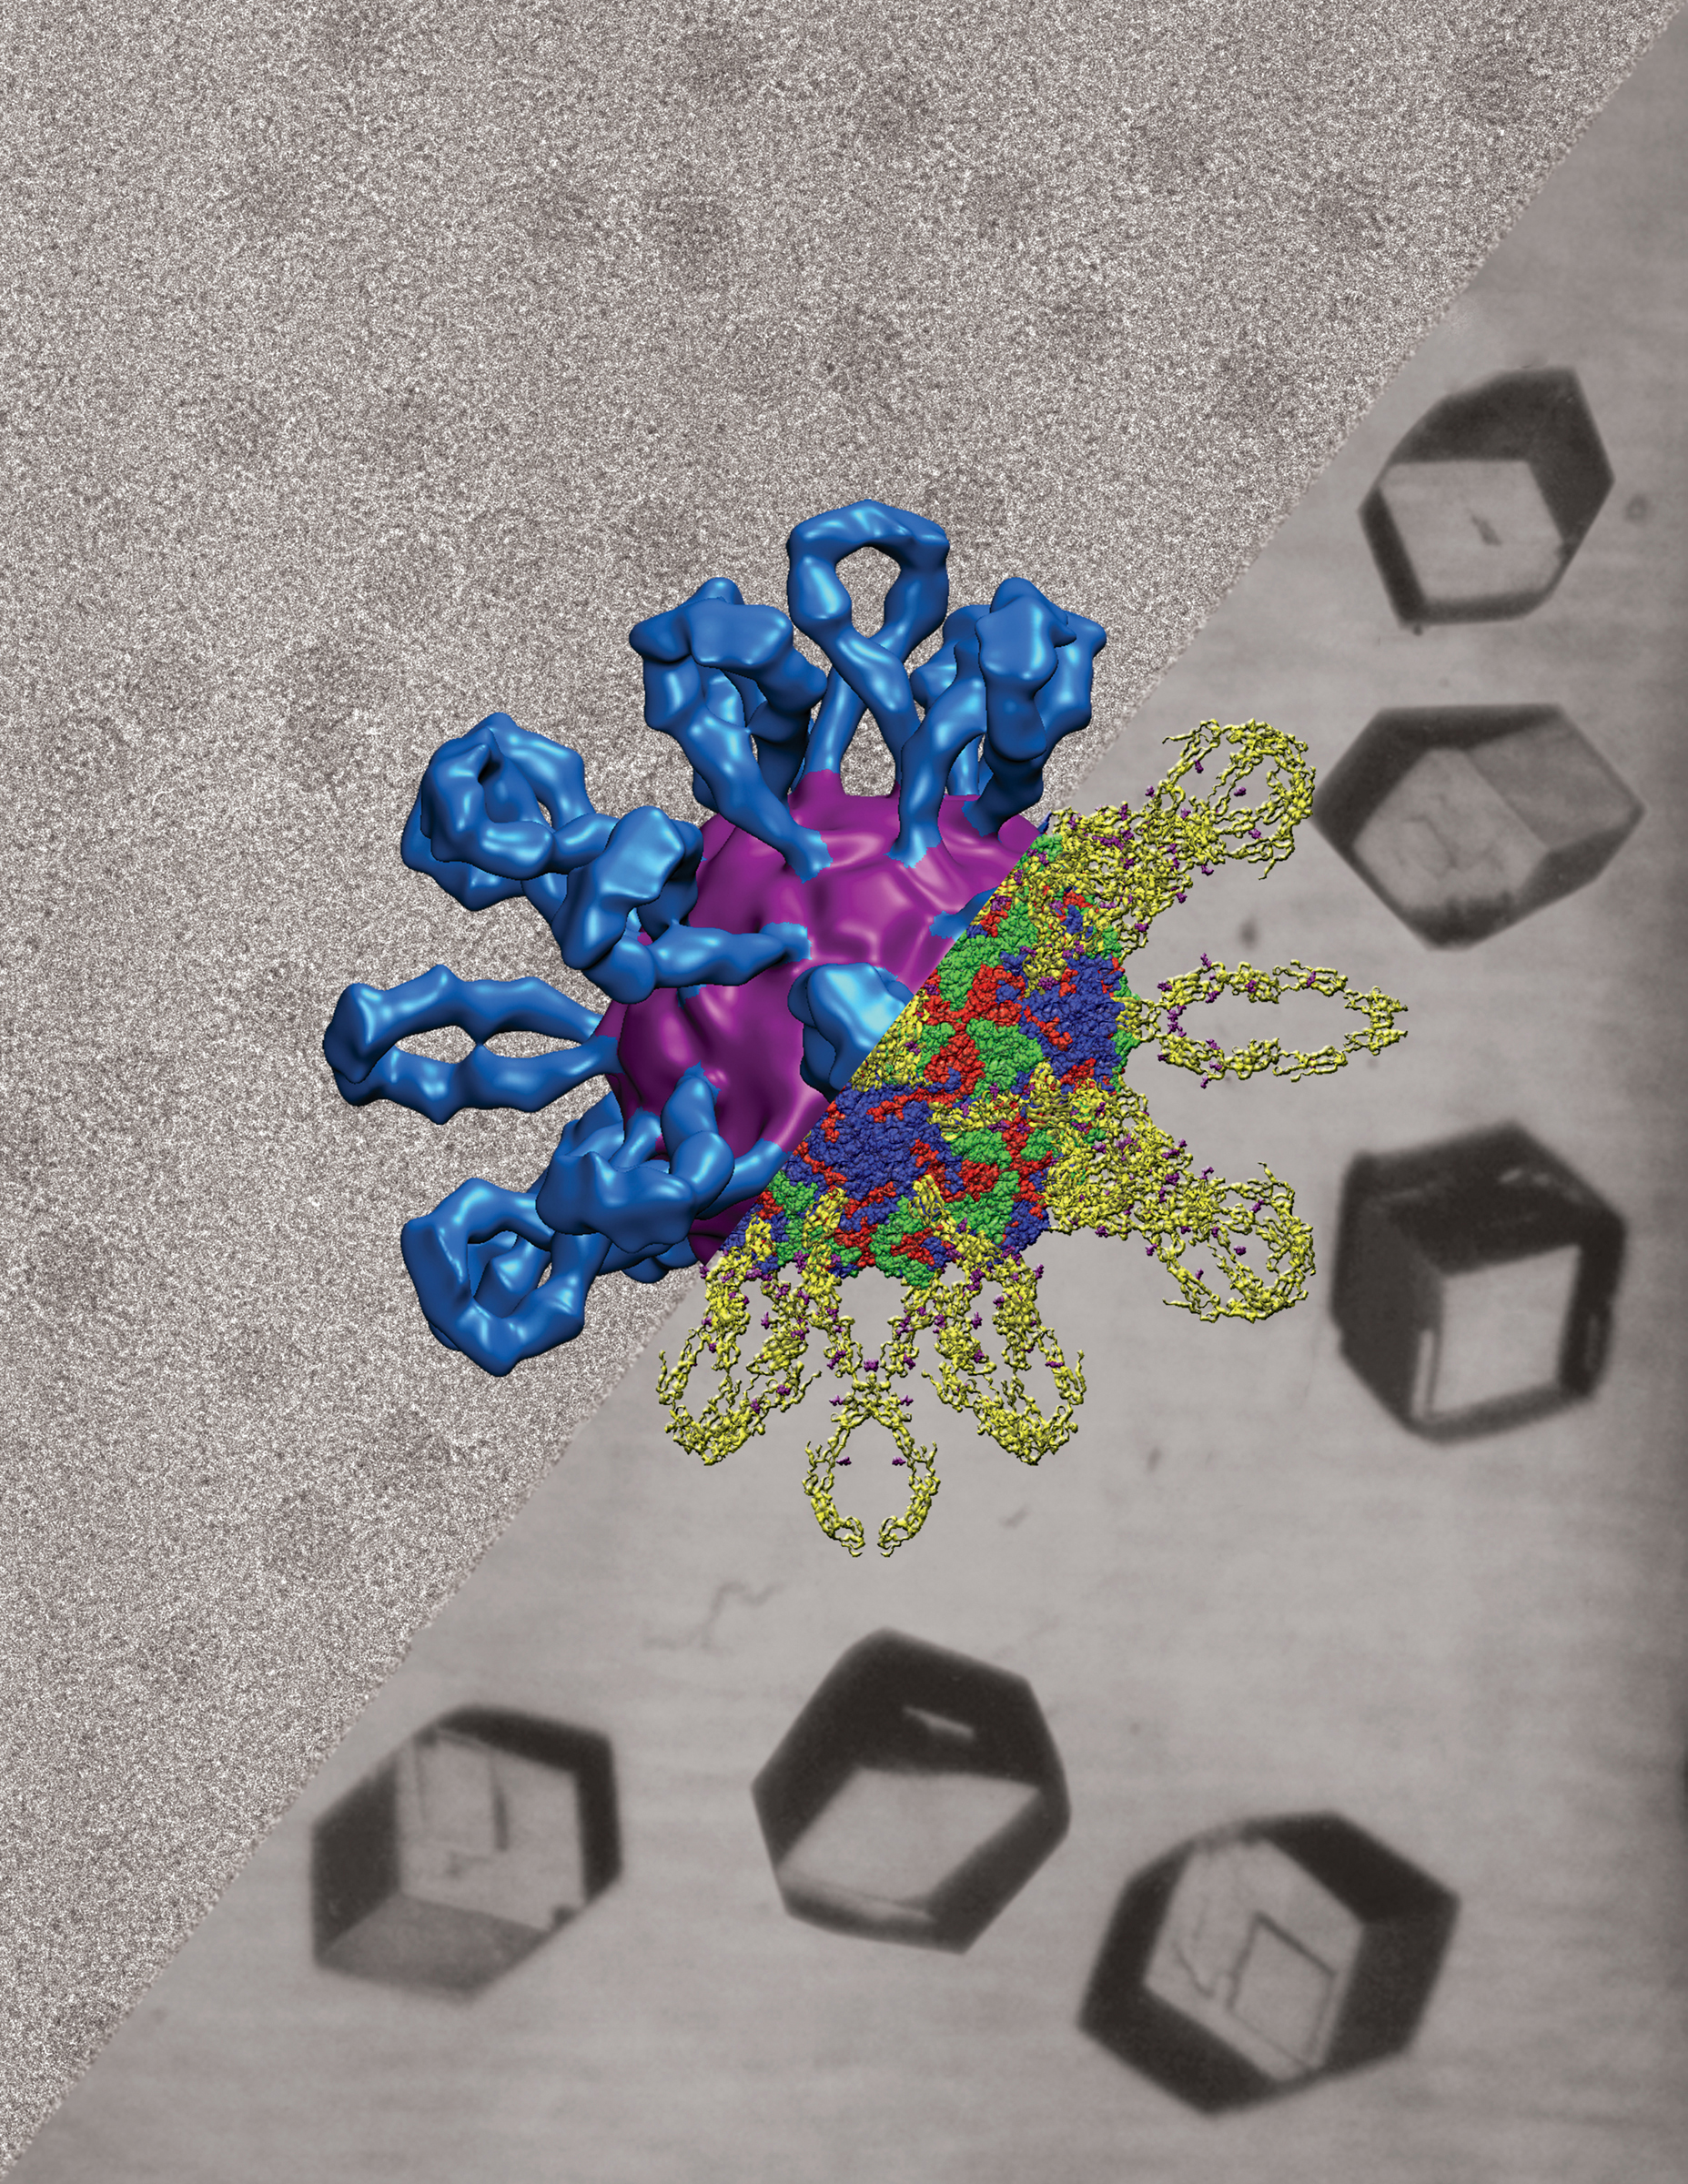 cold virus structure